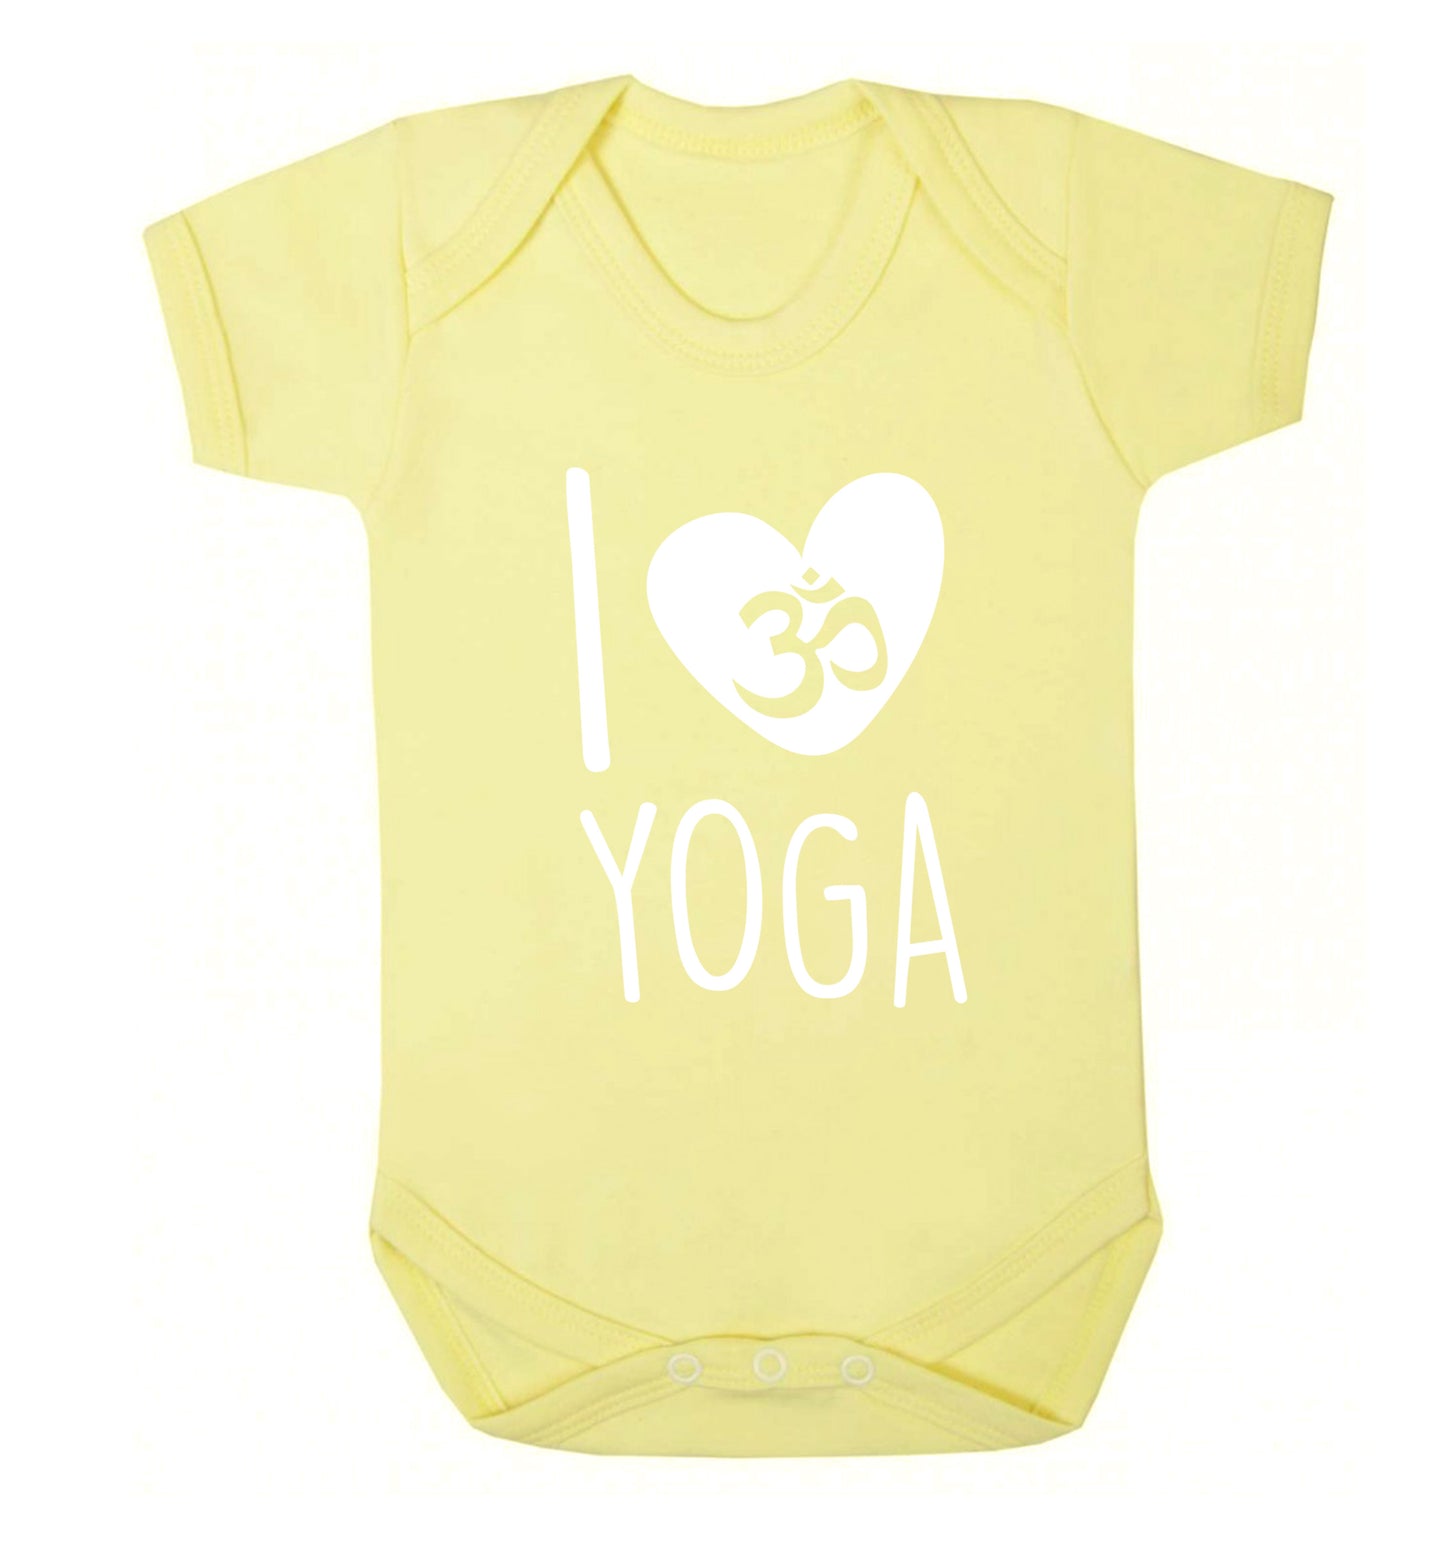 I love yoga Baby Vest pale yellow 18-24 months